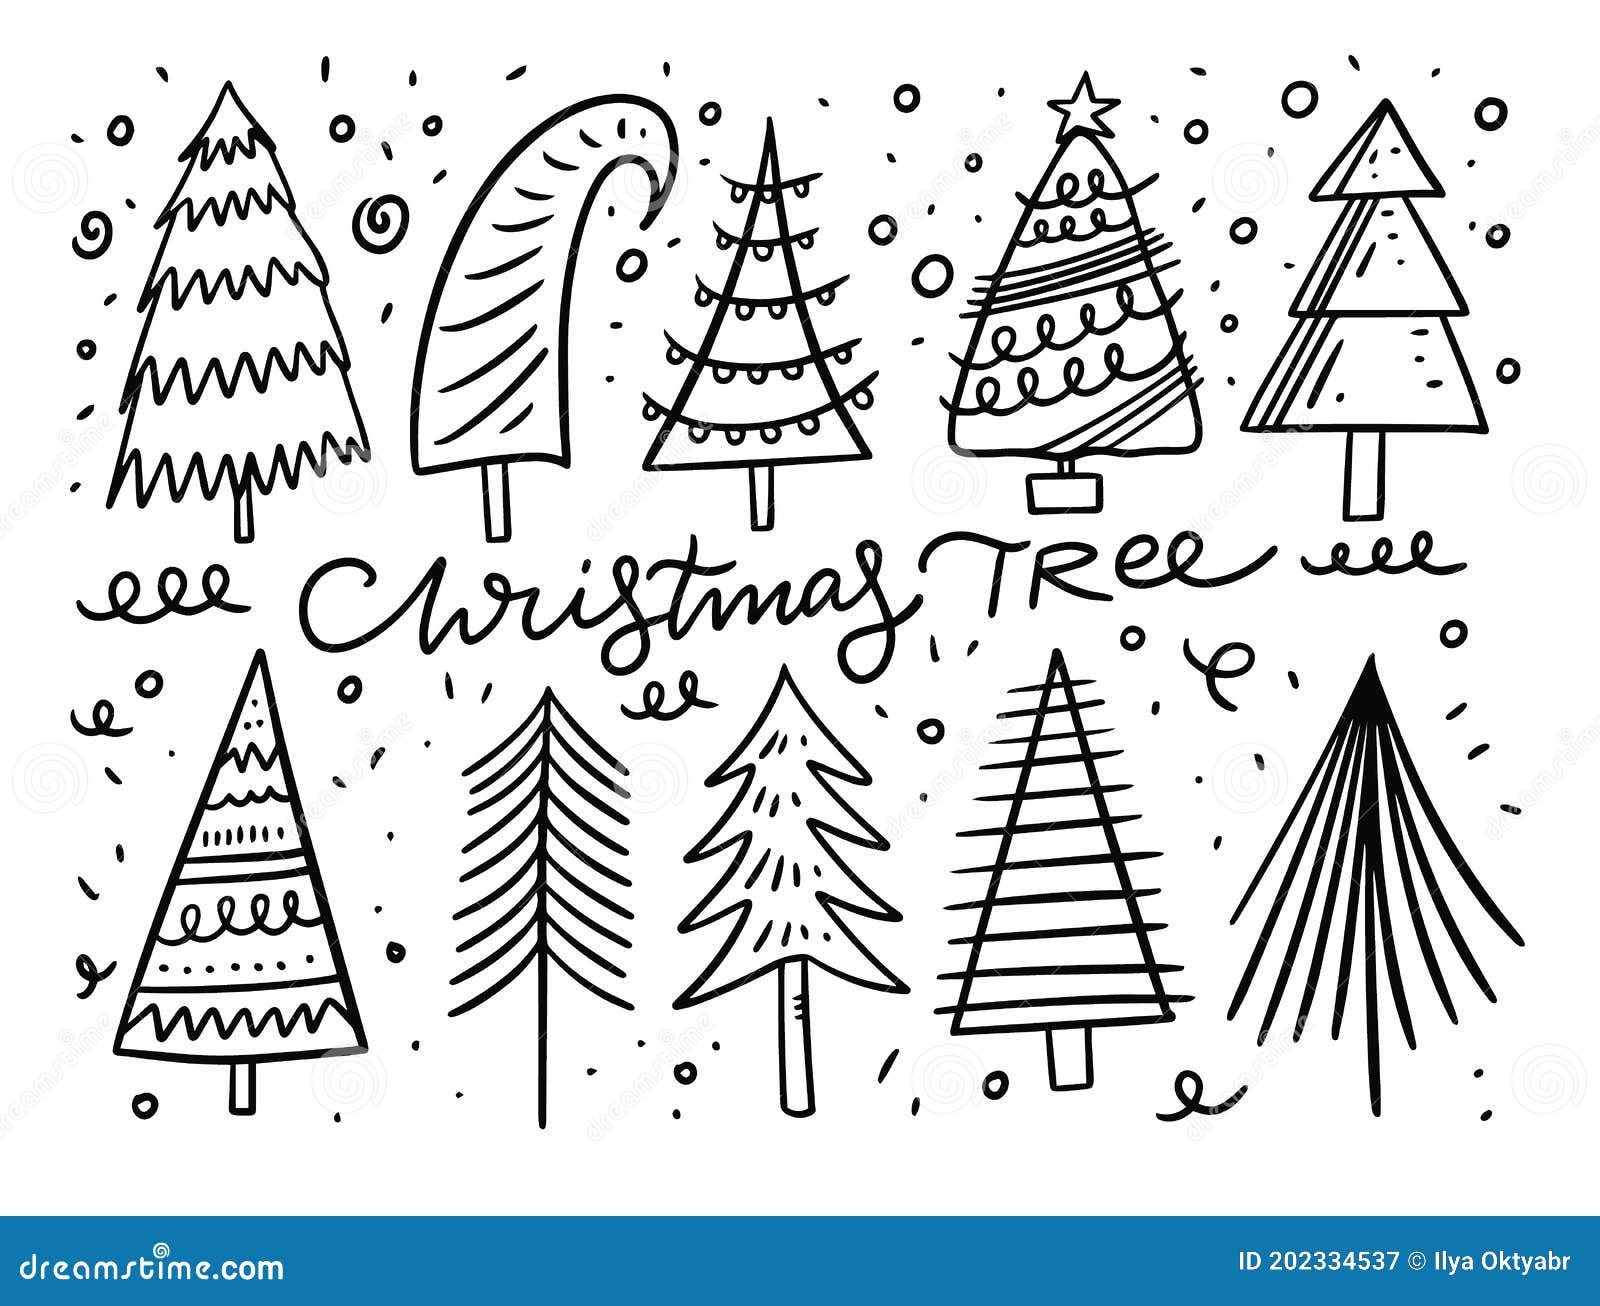 Premium AI Image  Simplicity Vector Art of a Black and White Cookie Cutter  Christmas Tree